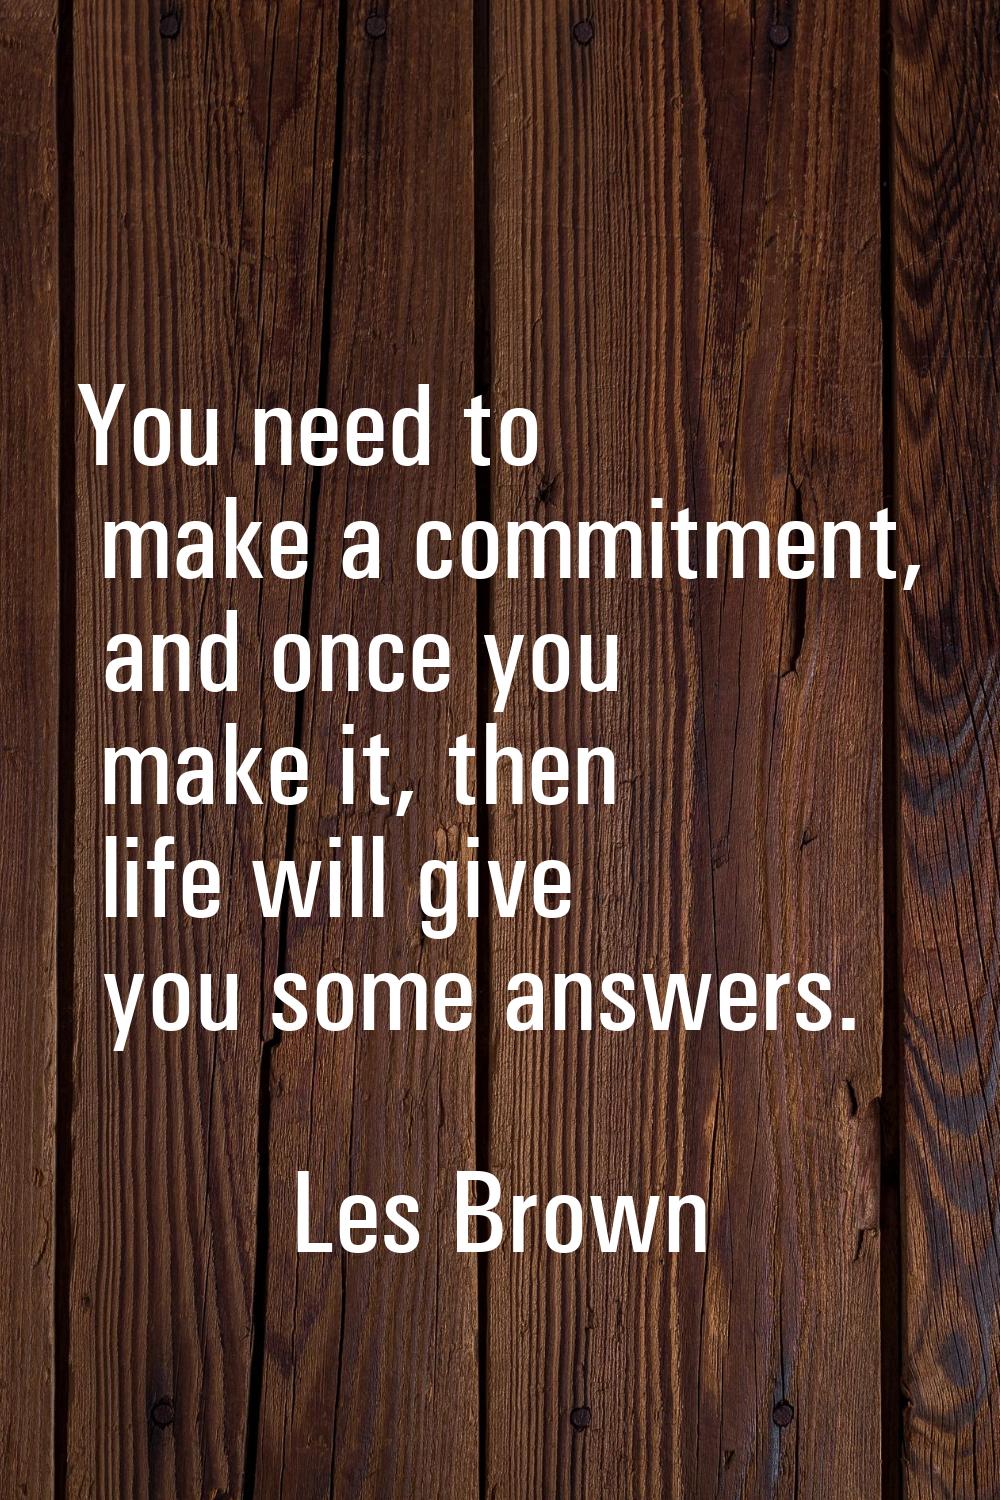 You need to make a commitment, and once you make it, then life will give you some answers.